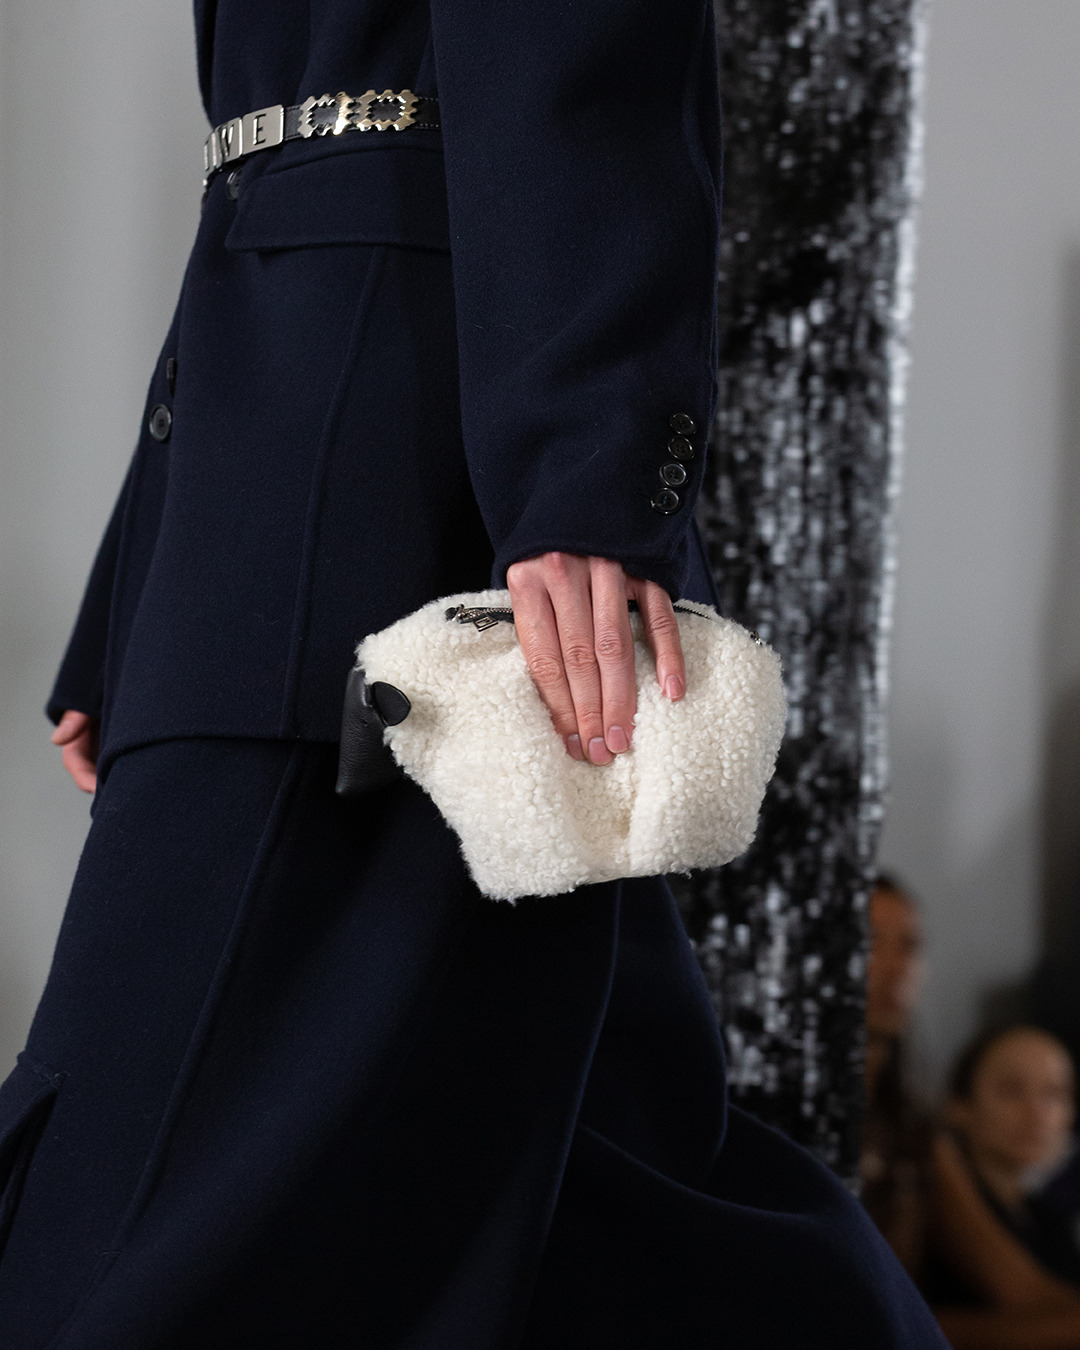 LOEWE - The mini Sheep bag in shearling and classic leather as seen at the LOEWE FW20 Men's show.

Now available in store

#LOEWE #LOEWEFW20